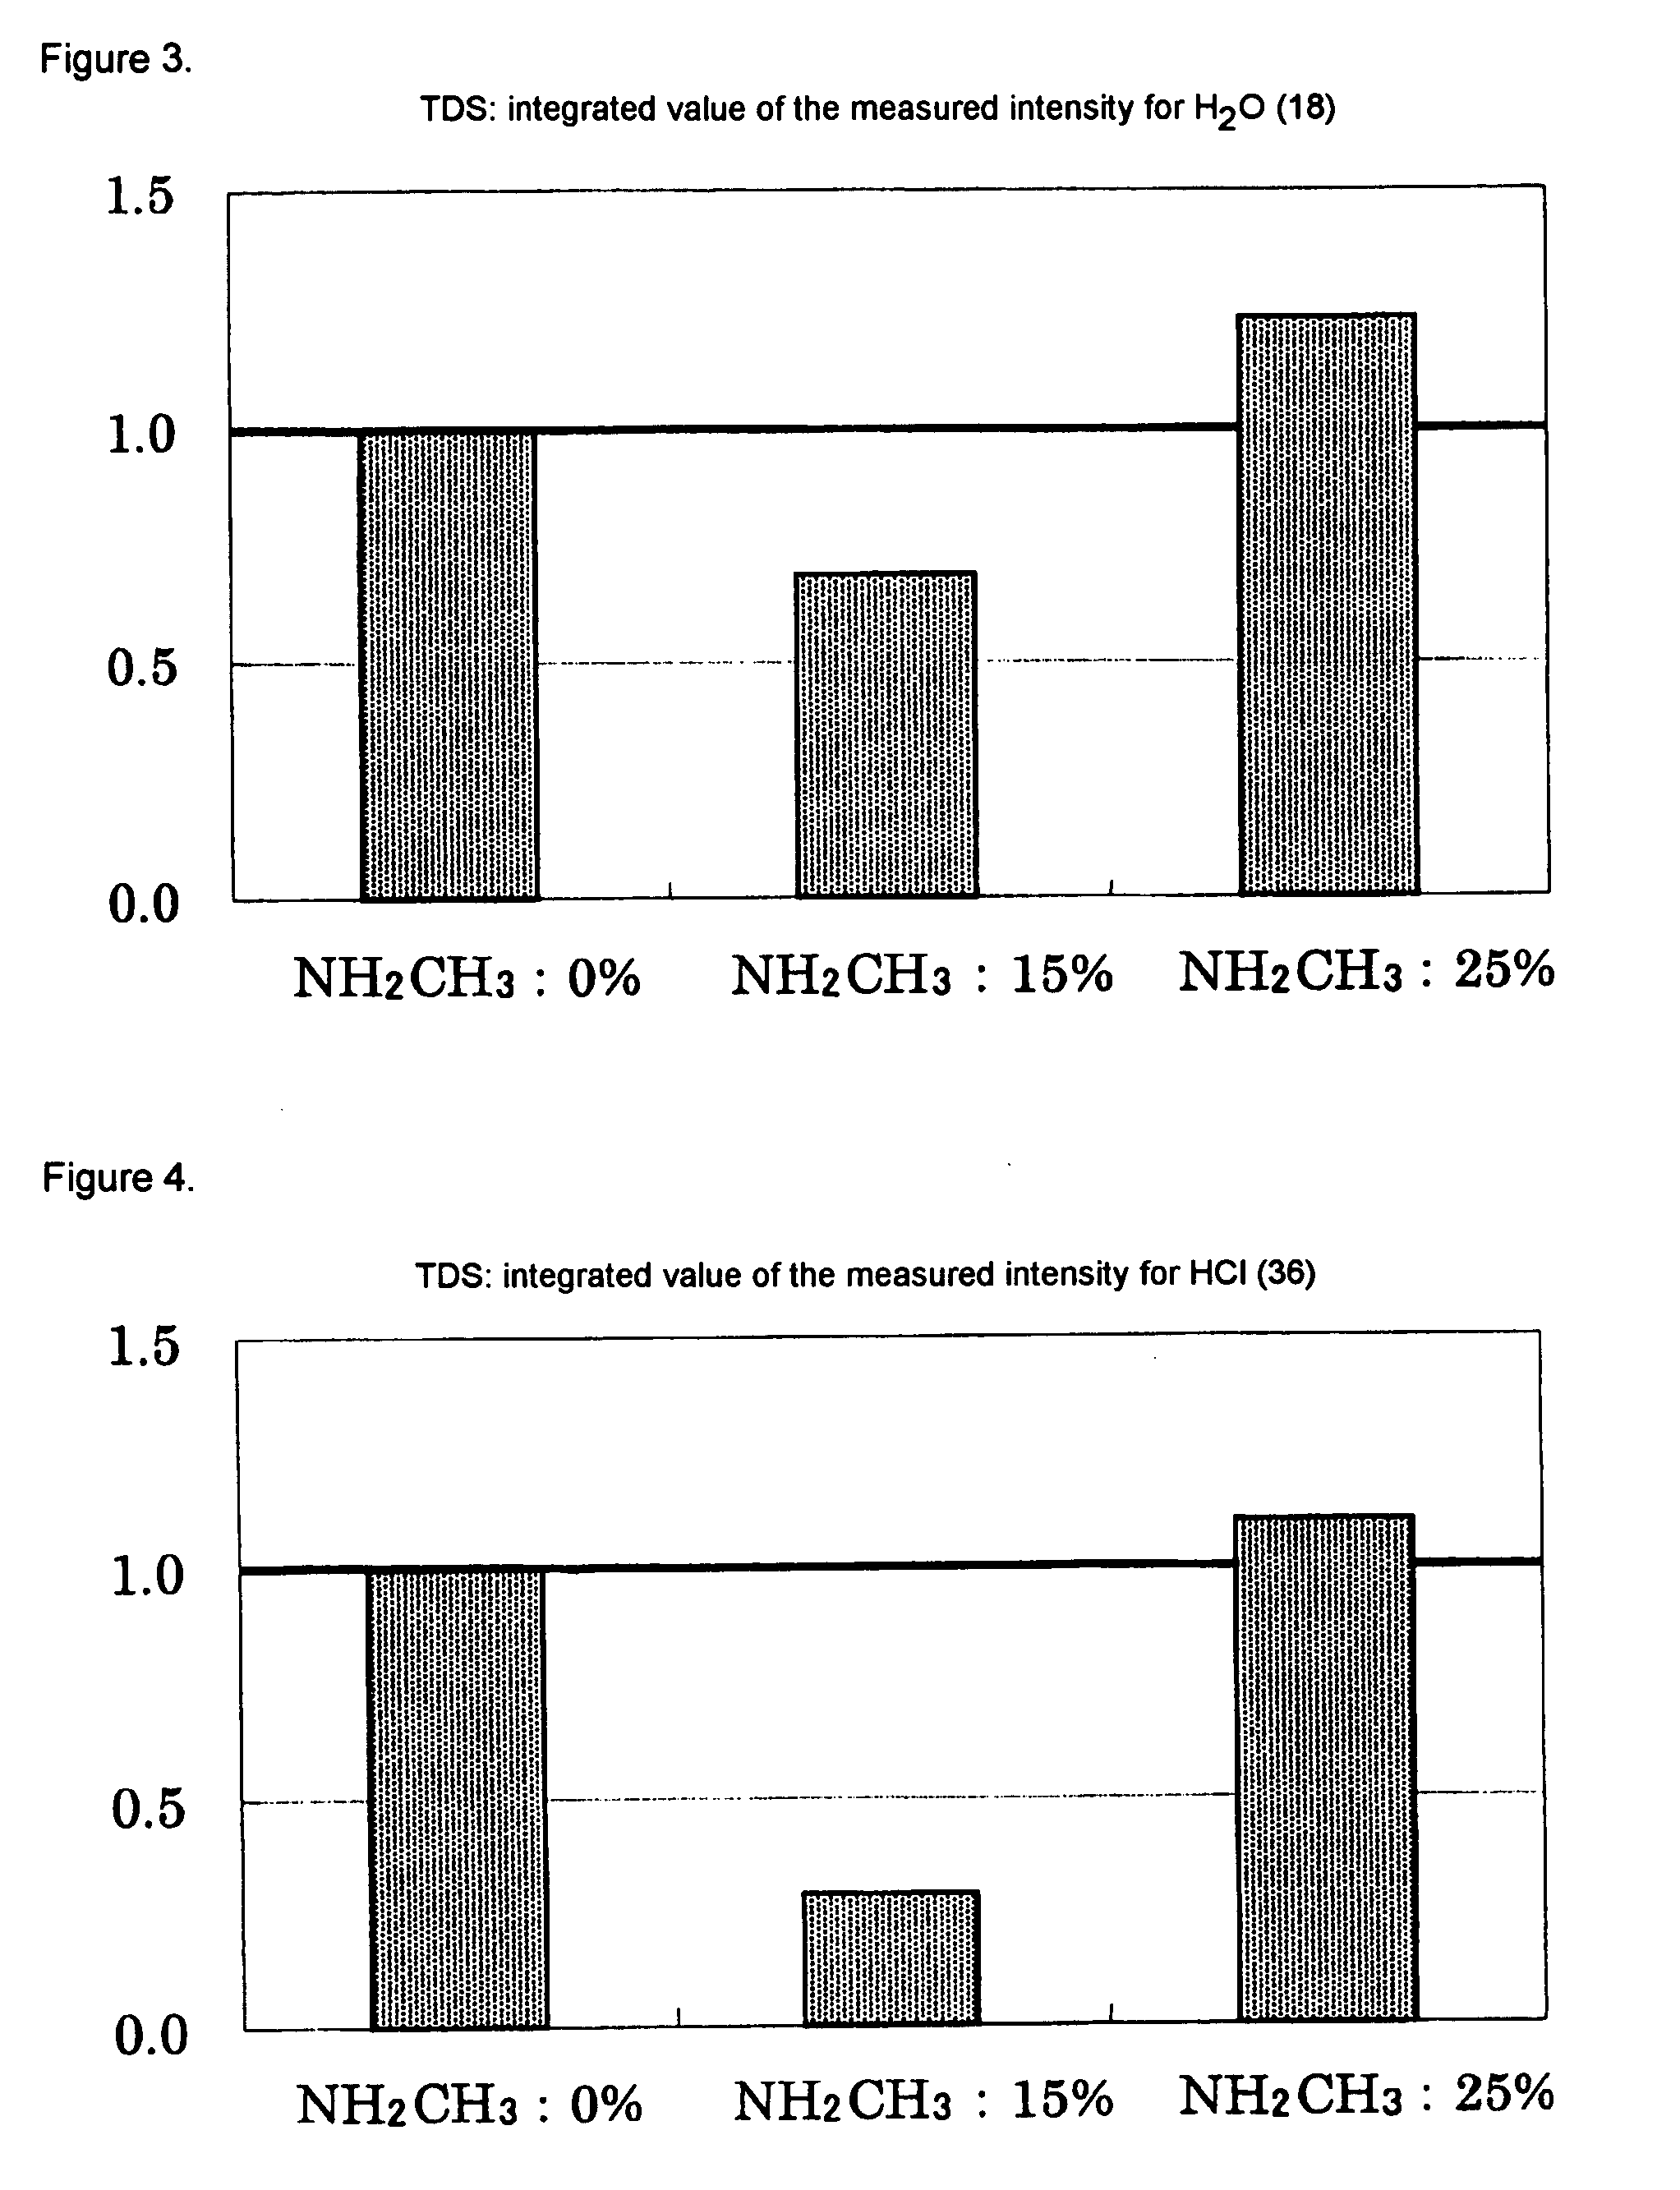 Method for producing silicon nitride films and process for fabricating semiconductor devices using said method